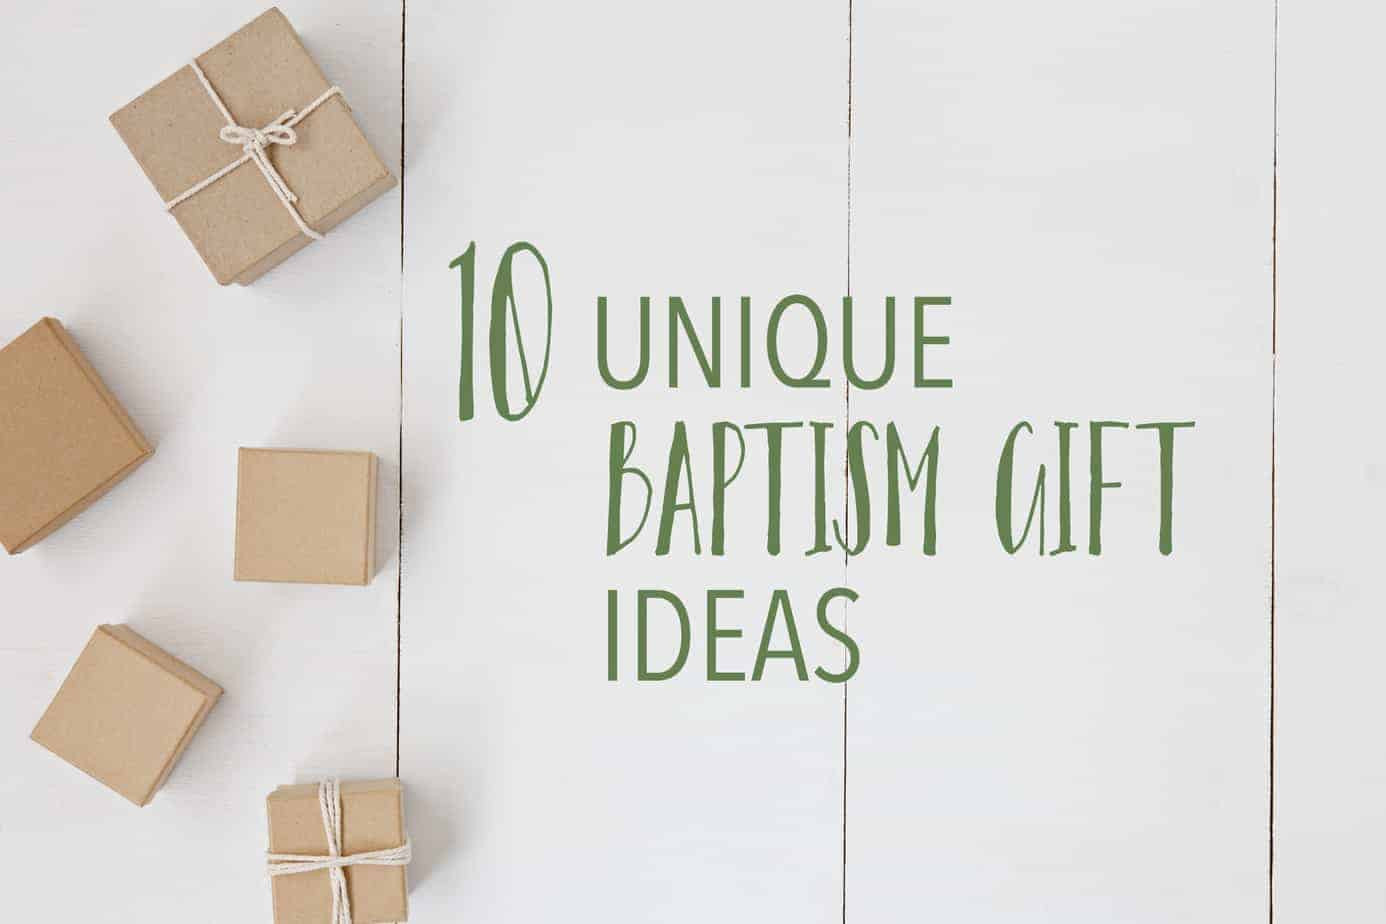 Baby Boy Christening Gift Ideas
 10 Unique Baptism Gifts that are Useful & Special